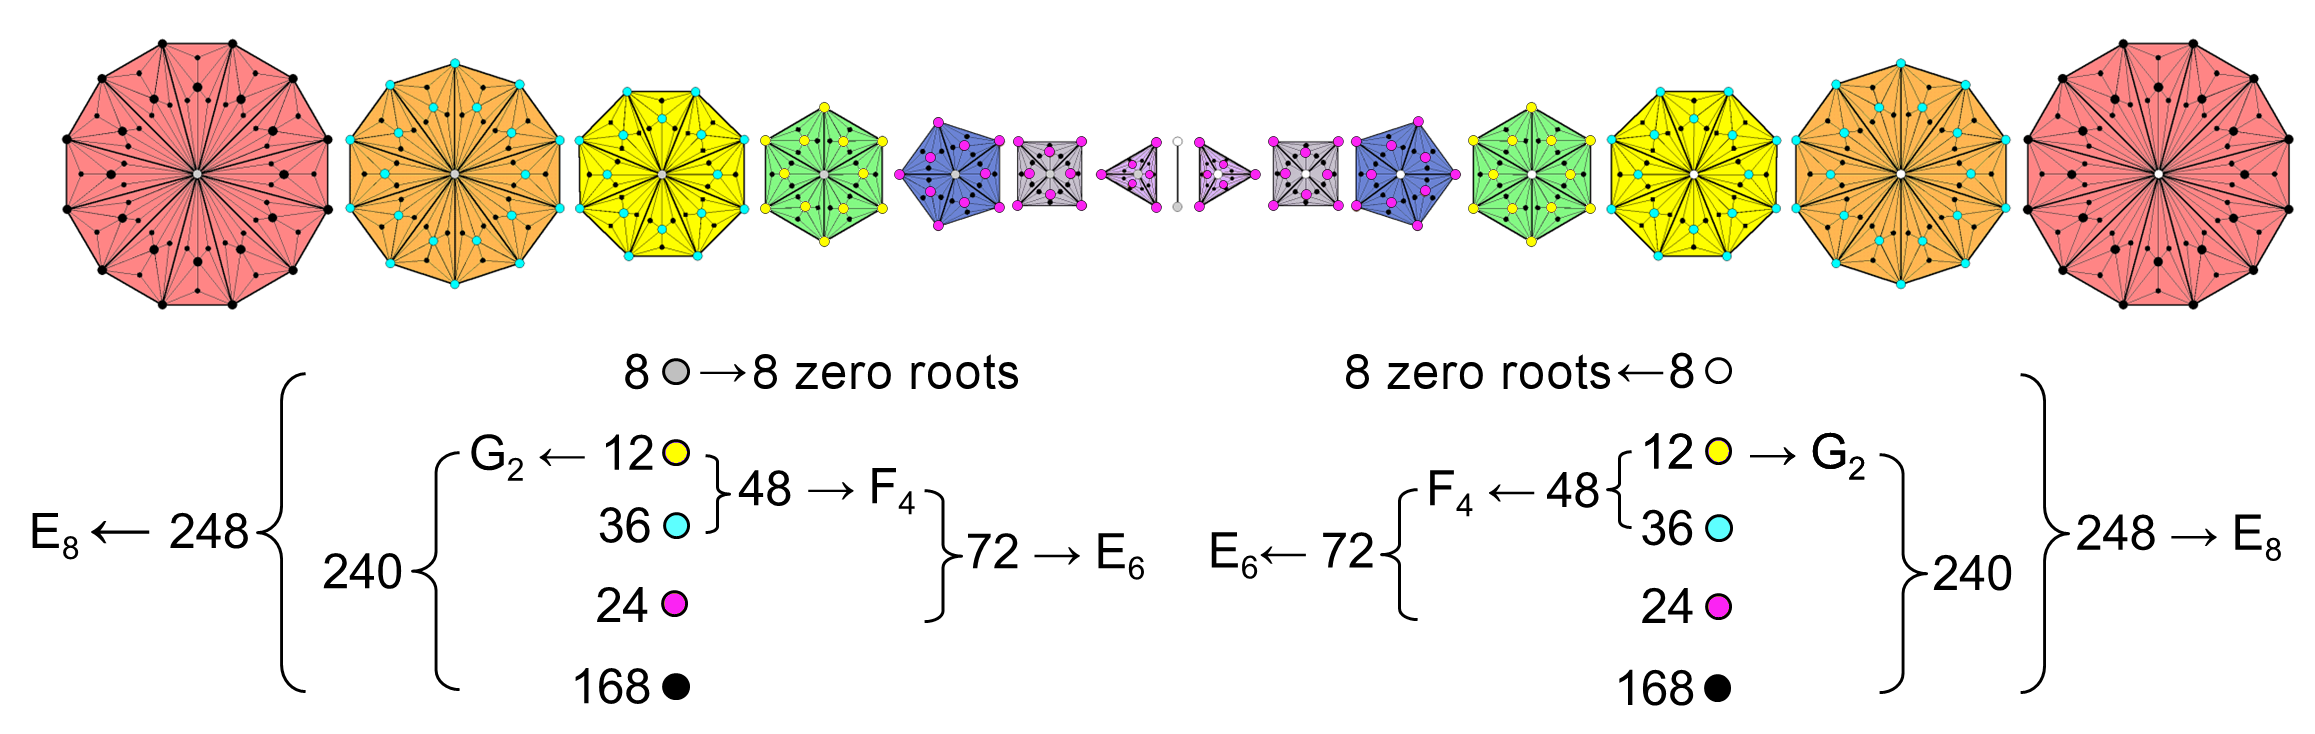 How the (7+7) Type C polygons embody the (248+248) roots of E8xE8'